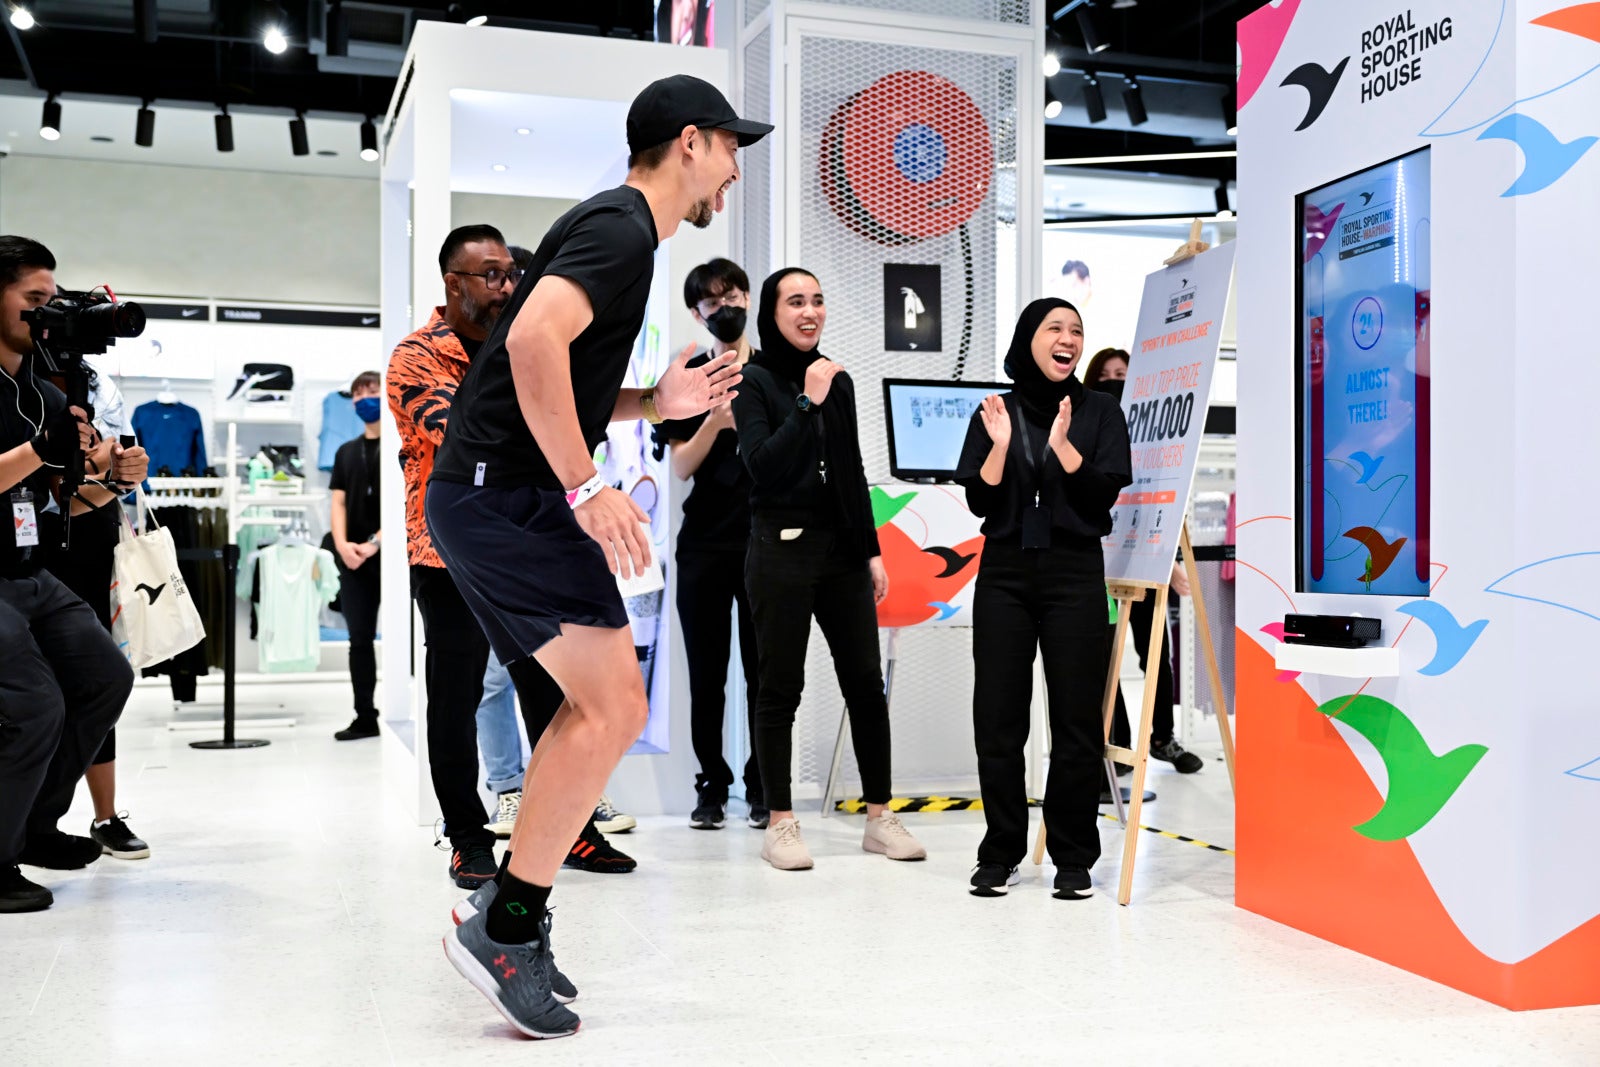 Sprint N Win Challenge guests can stand a chance to win a Royal Sporting House voucher worth RM1000